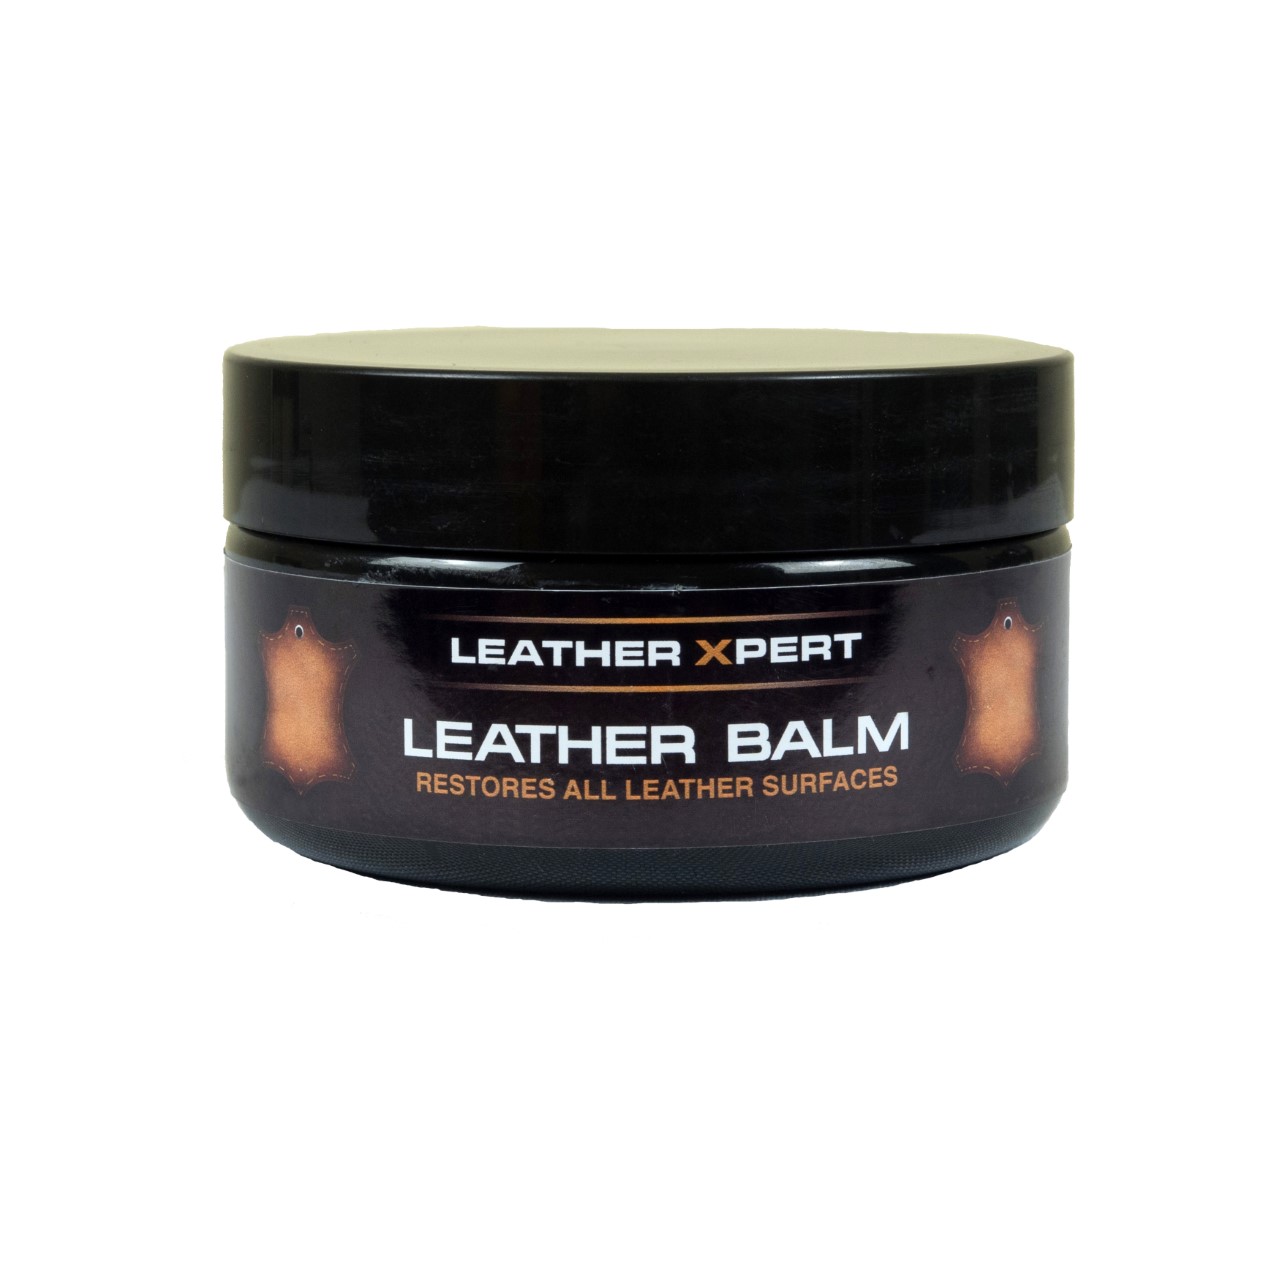 Leather Xpert Leather Balm - Starbrite